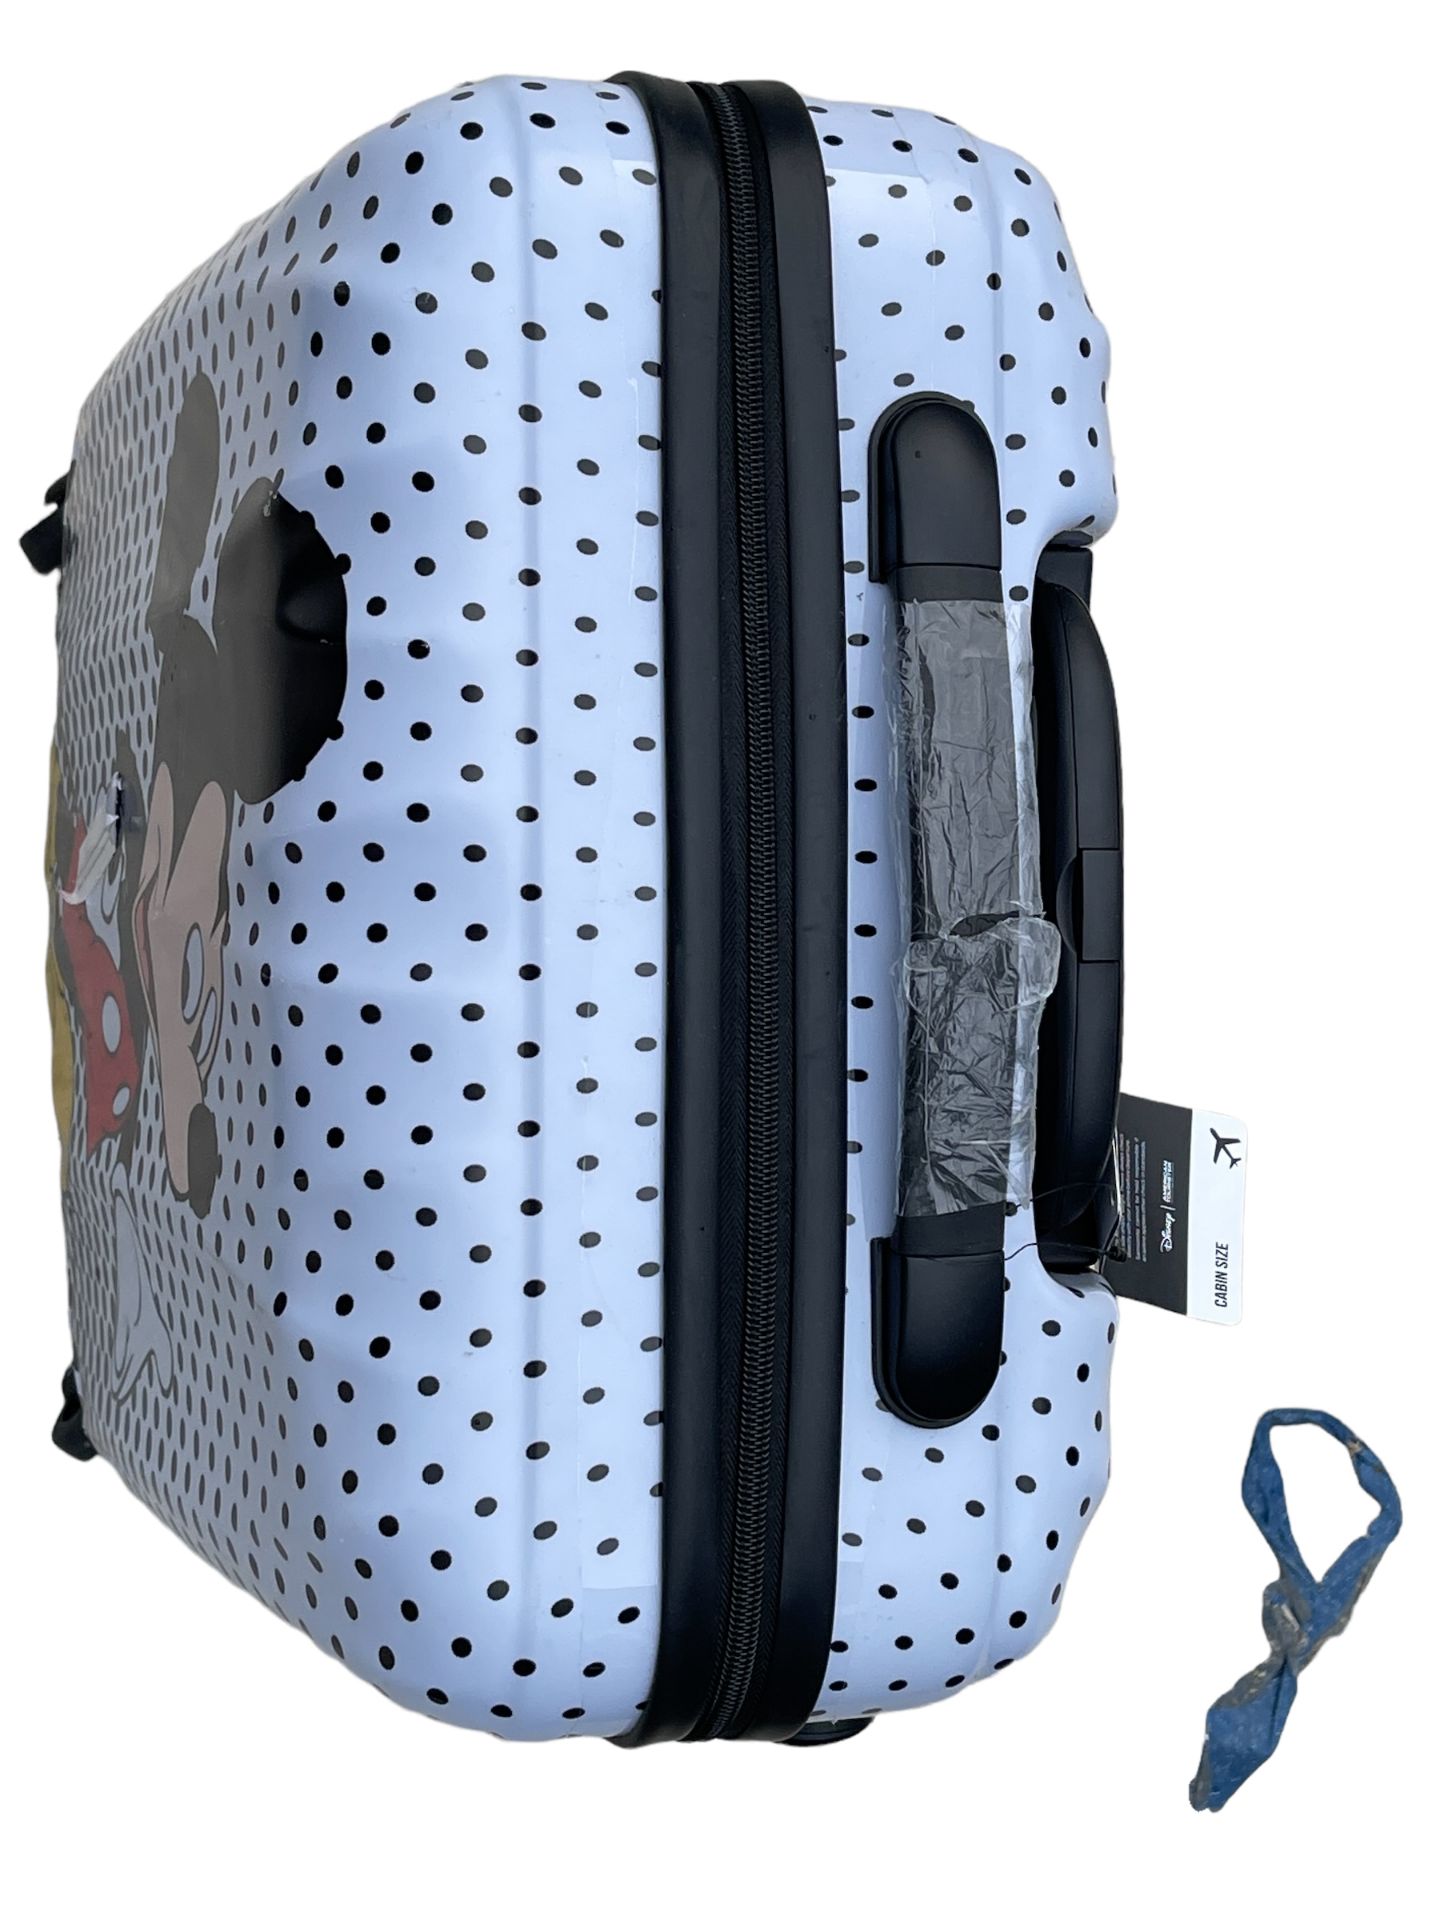 American Tourister Disney Mickey Mouse Polka Dot Carry-on Spinner Case 55cm - RRP £145 - Image 7 of 9